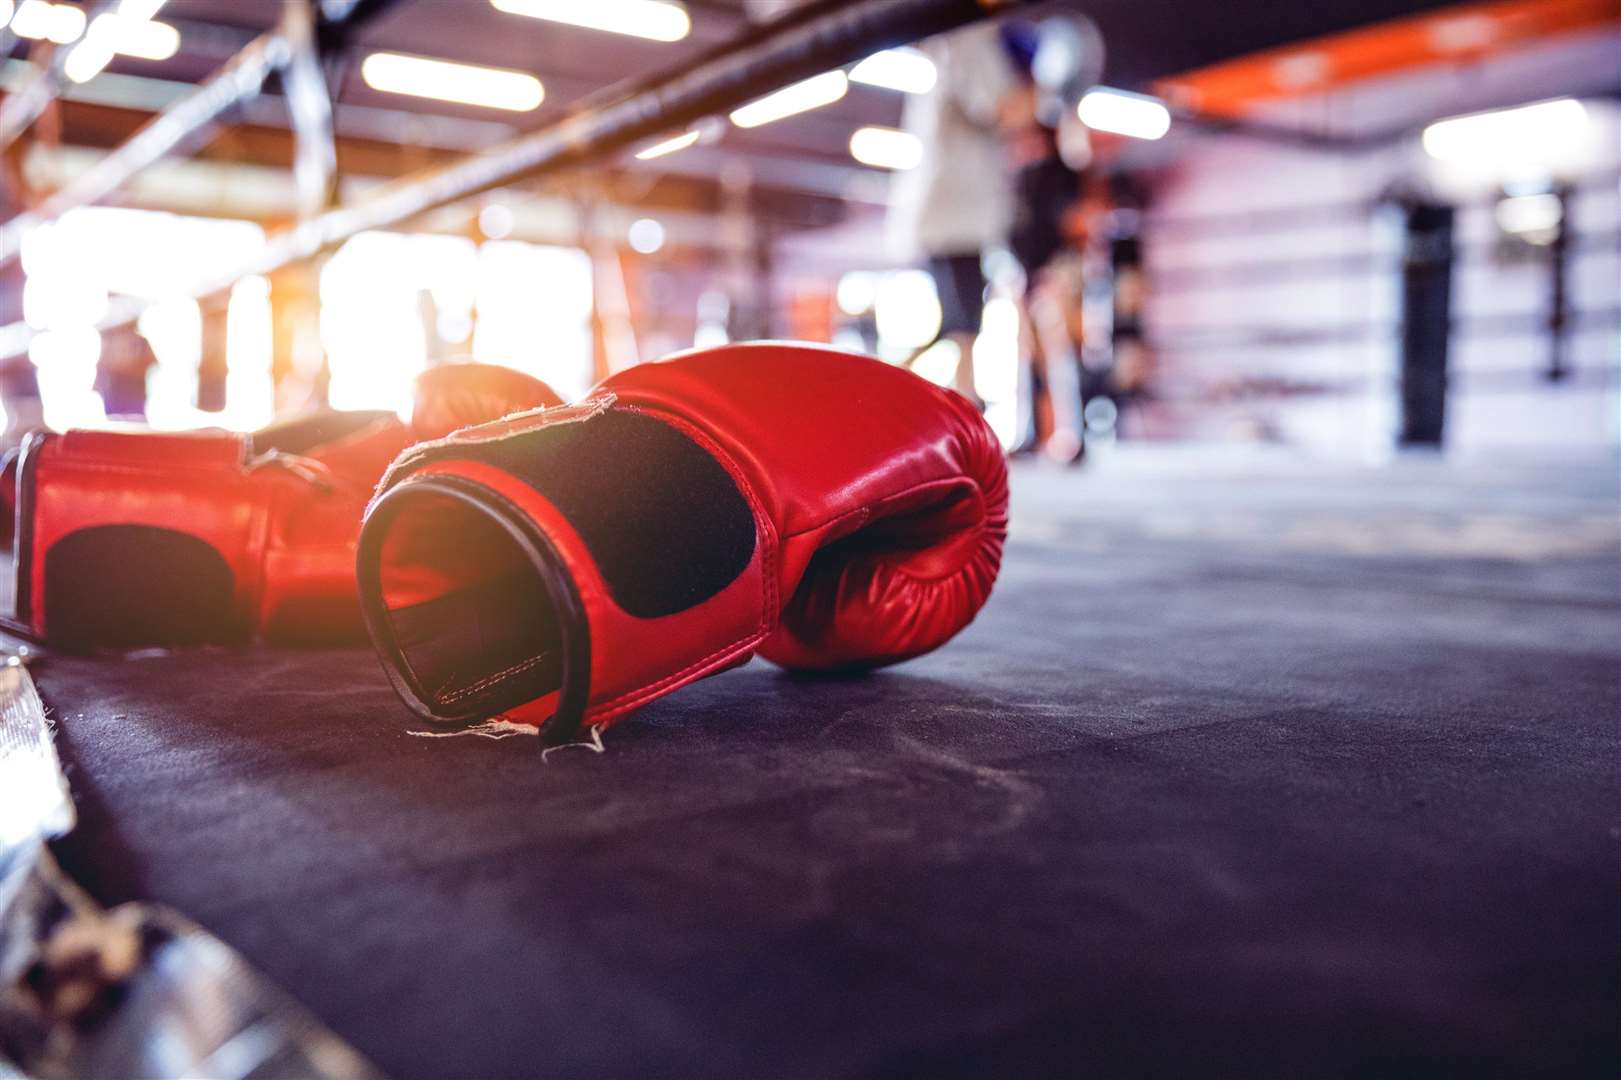 Have you tried boxercise yet?